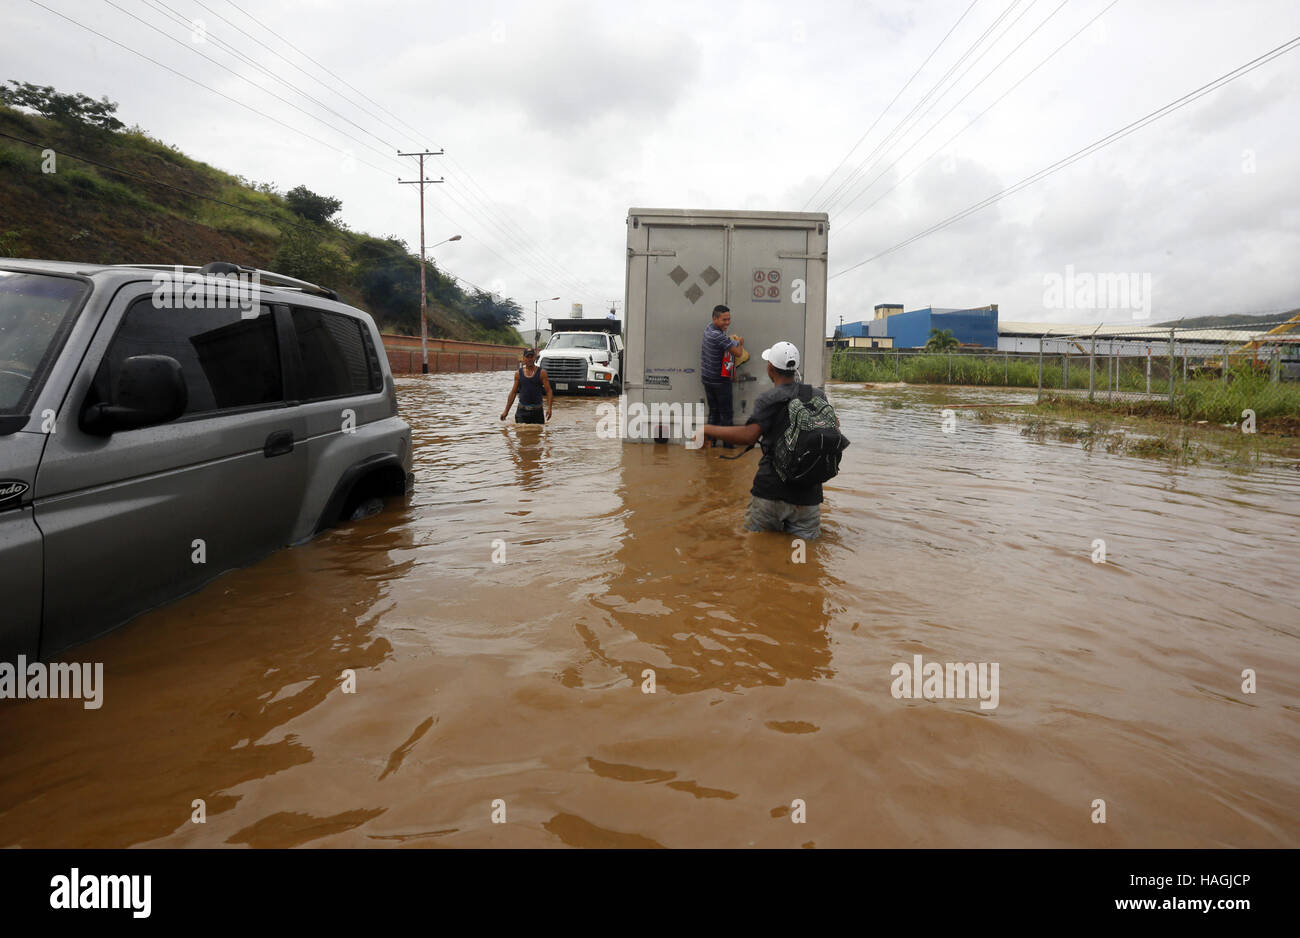 Valencia, Carabobo, Venezuela. 1st Dec, 2016. December 01, 2016 - Valencia, Carabobo, Venezuela - Large floods produced rains in 5 municipalities of Carabobo state, including San Diego, Guacara, Los guayos, Puerto cabello and Valencia. There are innumerable material losses, the amount of vehicles affected so far have been unquantifiable.There are two people missing, In Valencia, Venezuela. Credit:  Juan Carlos Hernandez/ZUMA Wire/Alamy Live News Stock Photo